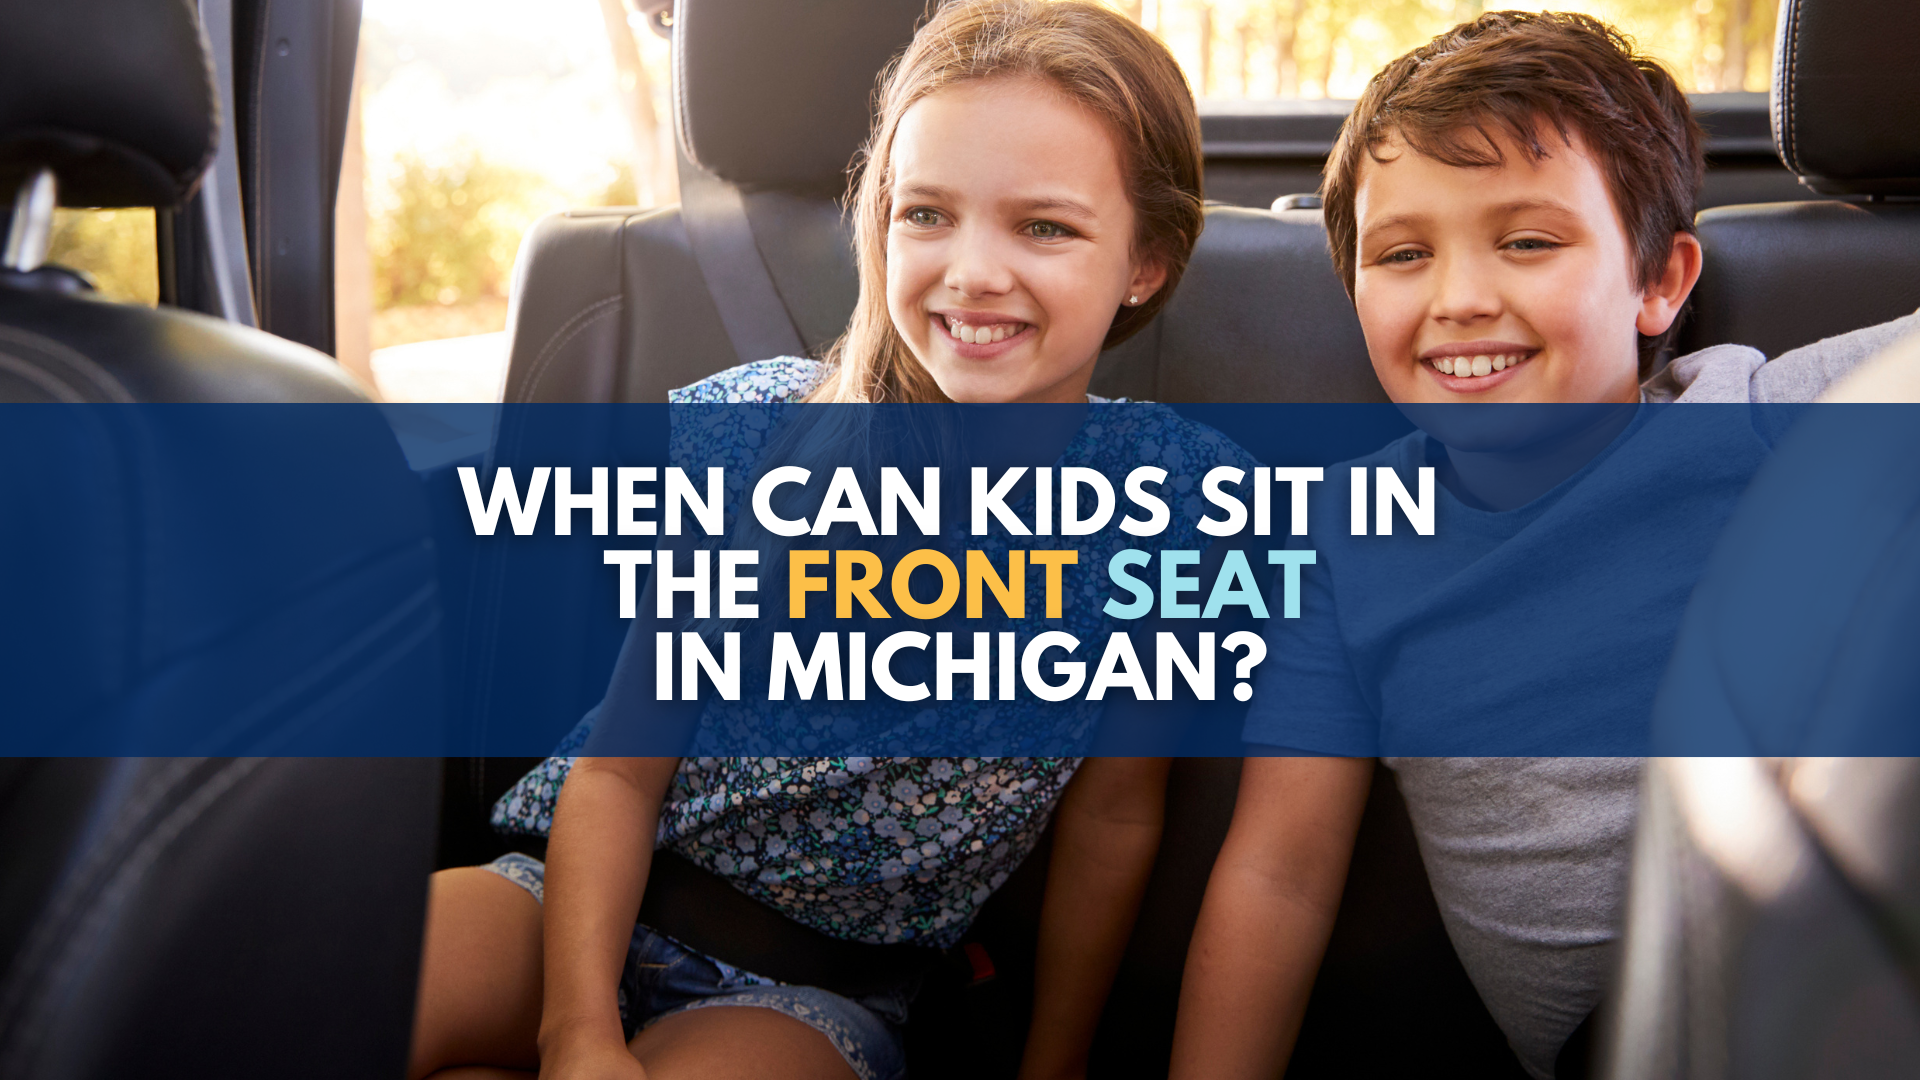 https://www.michiganautolaw.com/wp-content/uploads/2023/06/MAL_Blog_when-can-kids-sit-in-front_-1920-%C3%97-1080-px.png